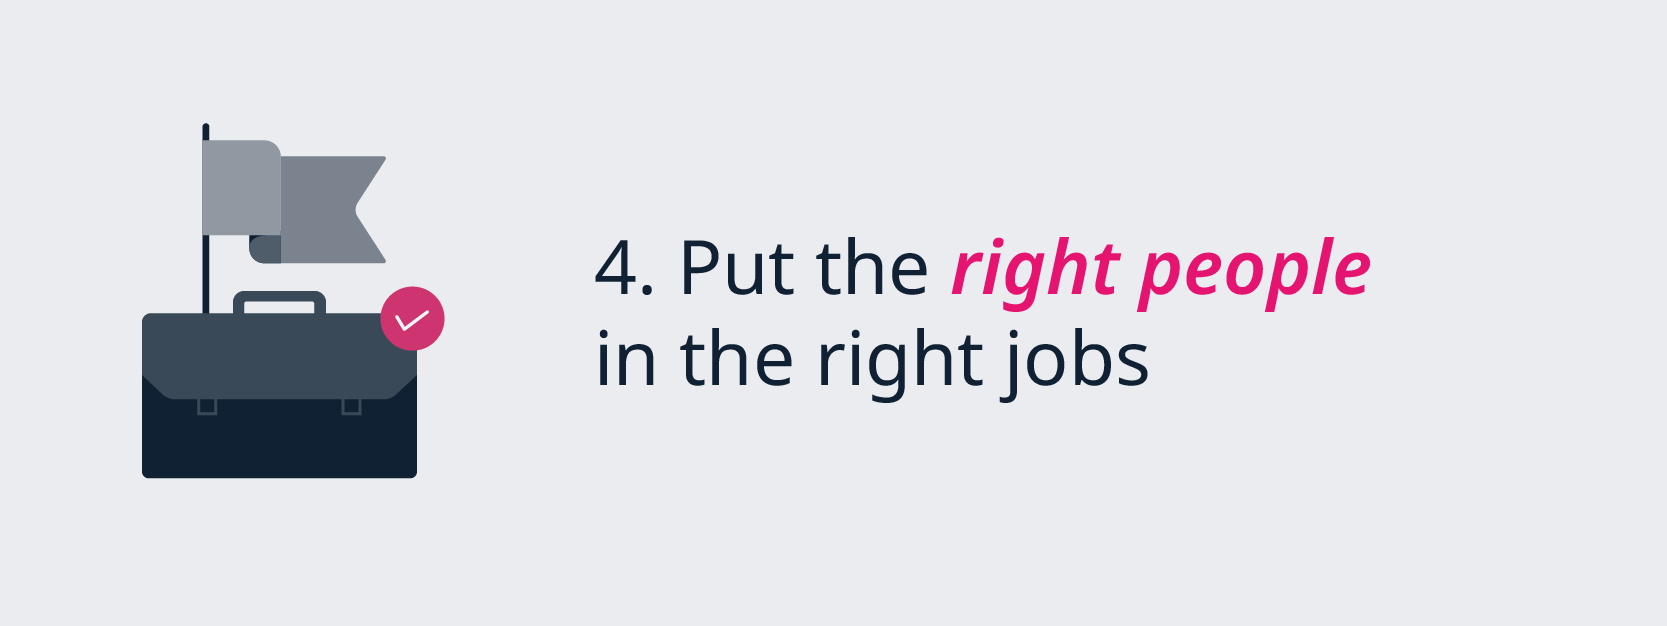 Step 4 towards successful digital transformation: Put the right people in the right jobs.